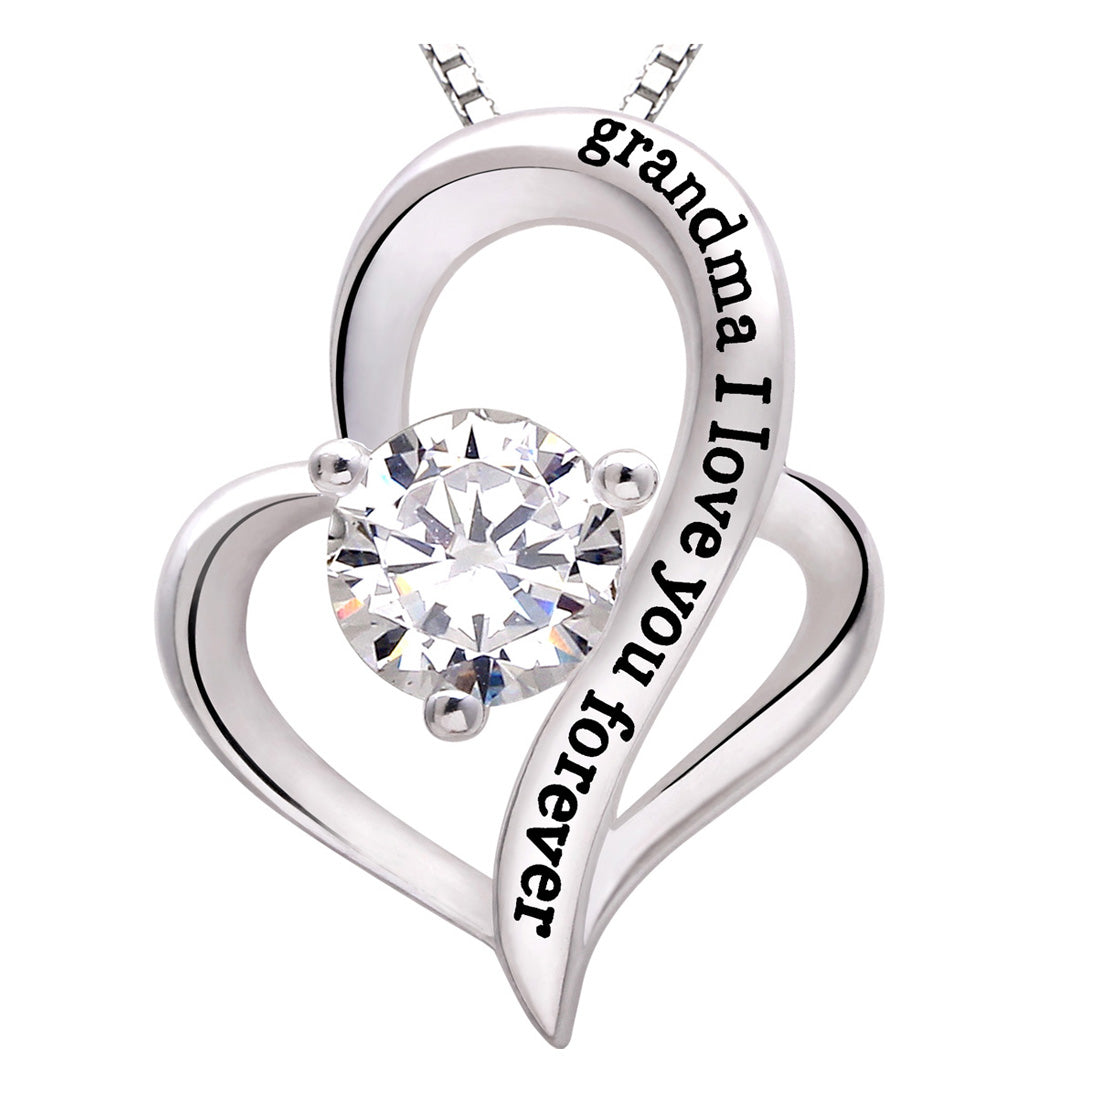 ALOV Jewelry Sterling Silver "grandma I love you forever" Love Heart Cubic Zirconia Pendant Necklace